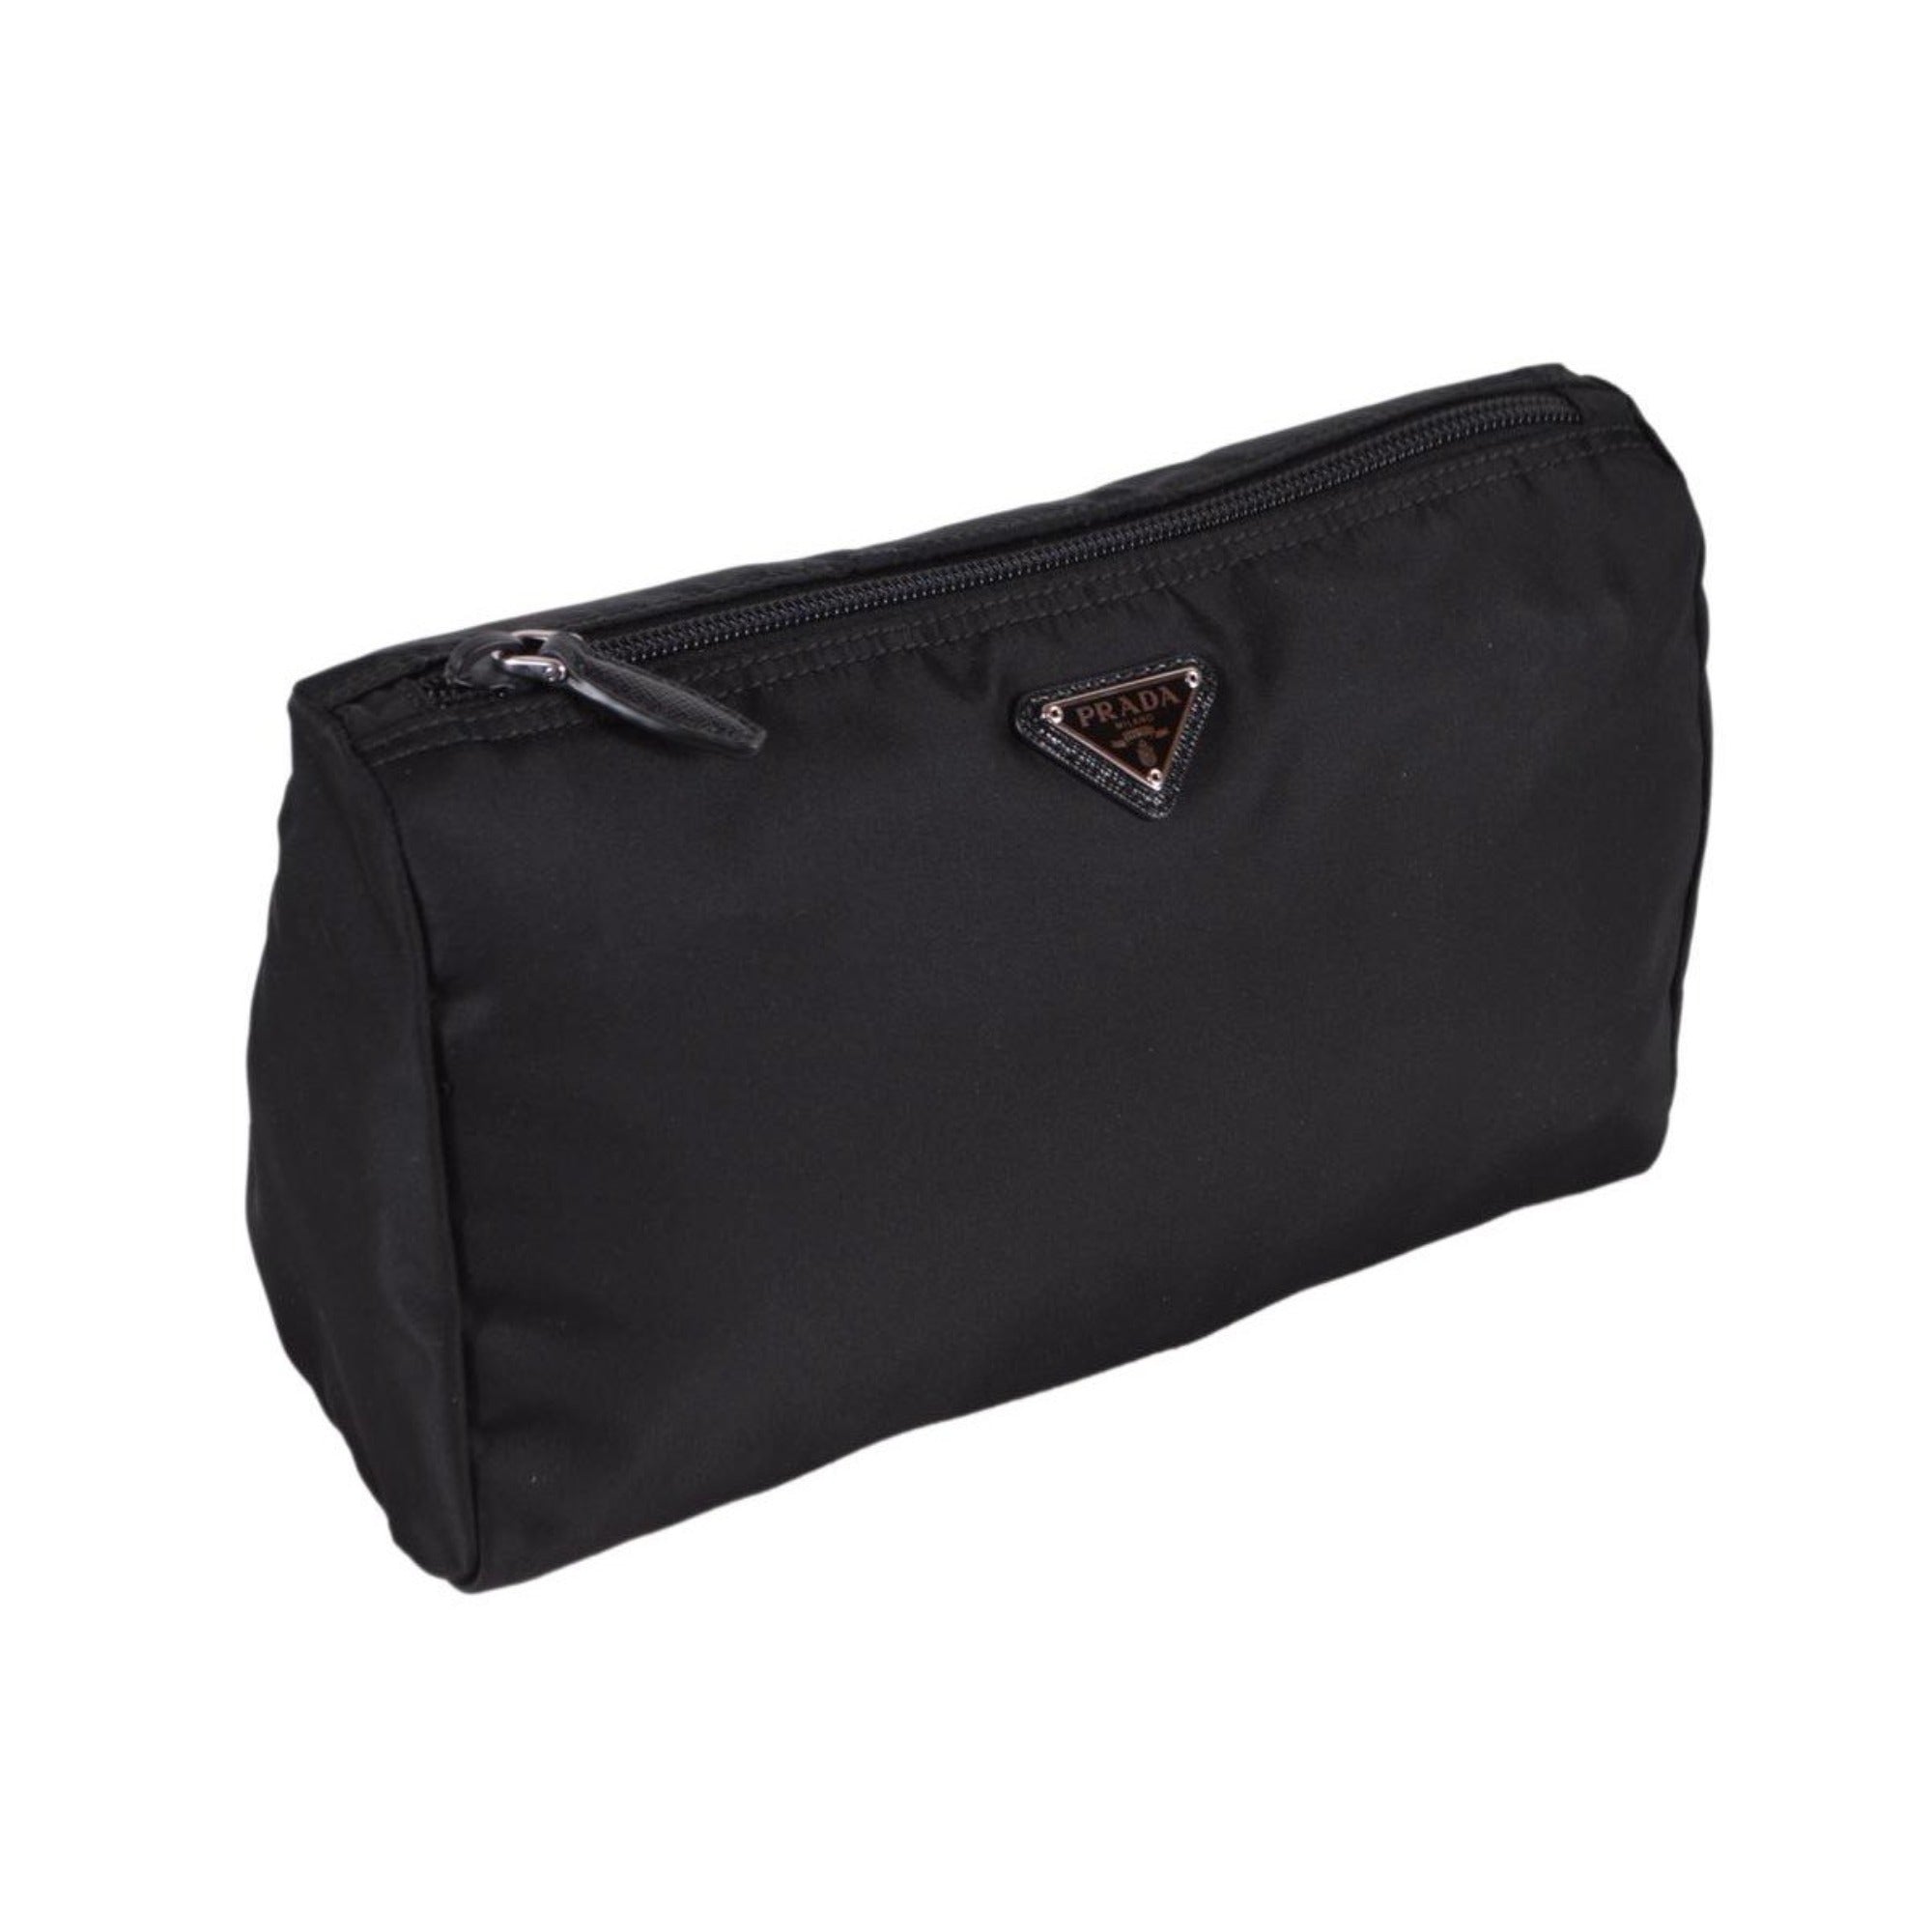 Prada Necessaire Black Tessuto Nylon Large Toiletry Case 1NA012 at_Queen_Bee_of_Beverly_Hills